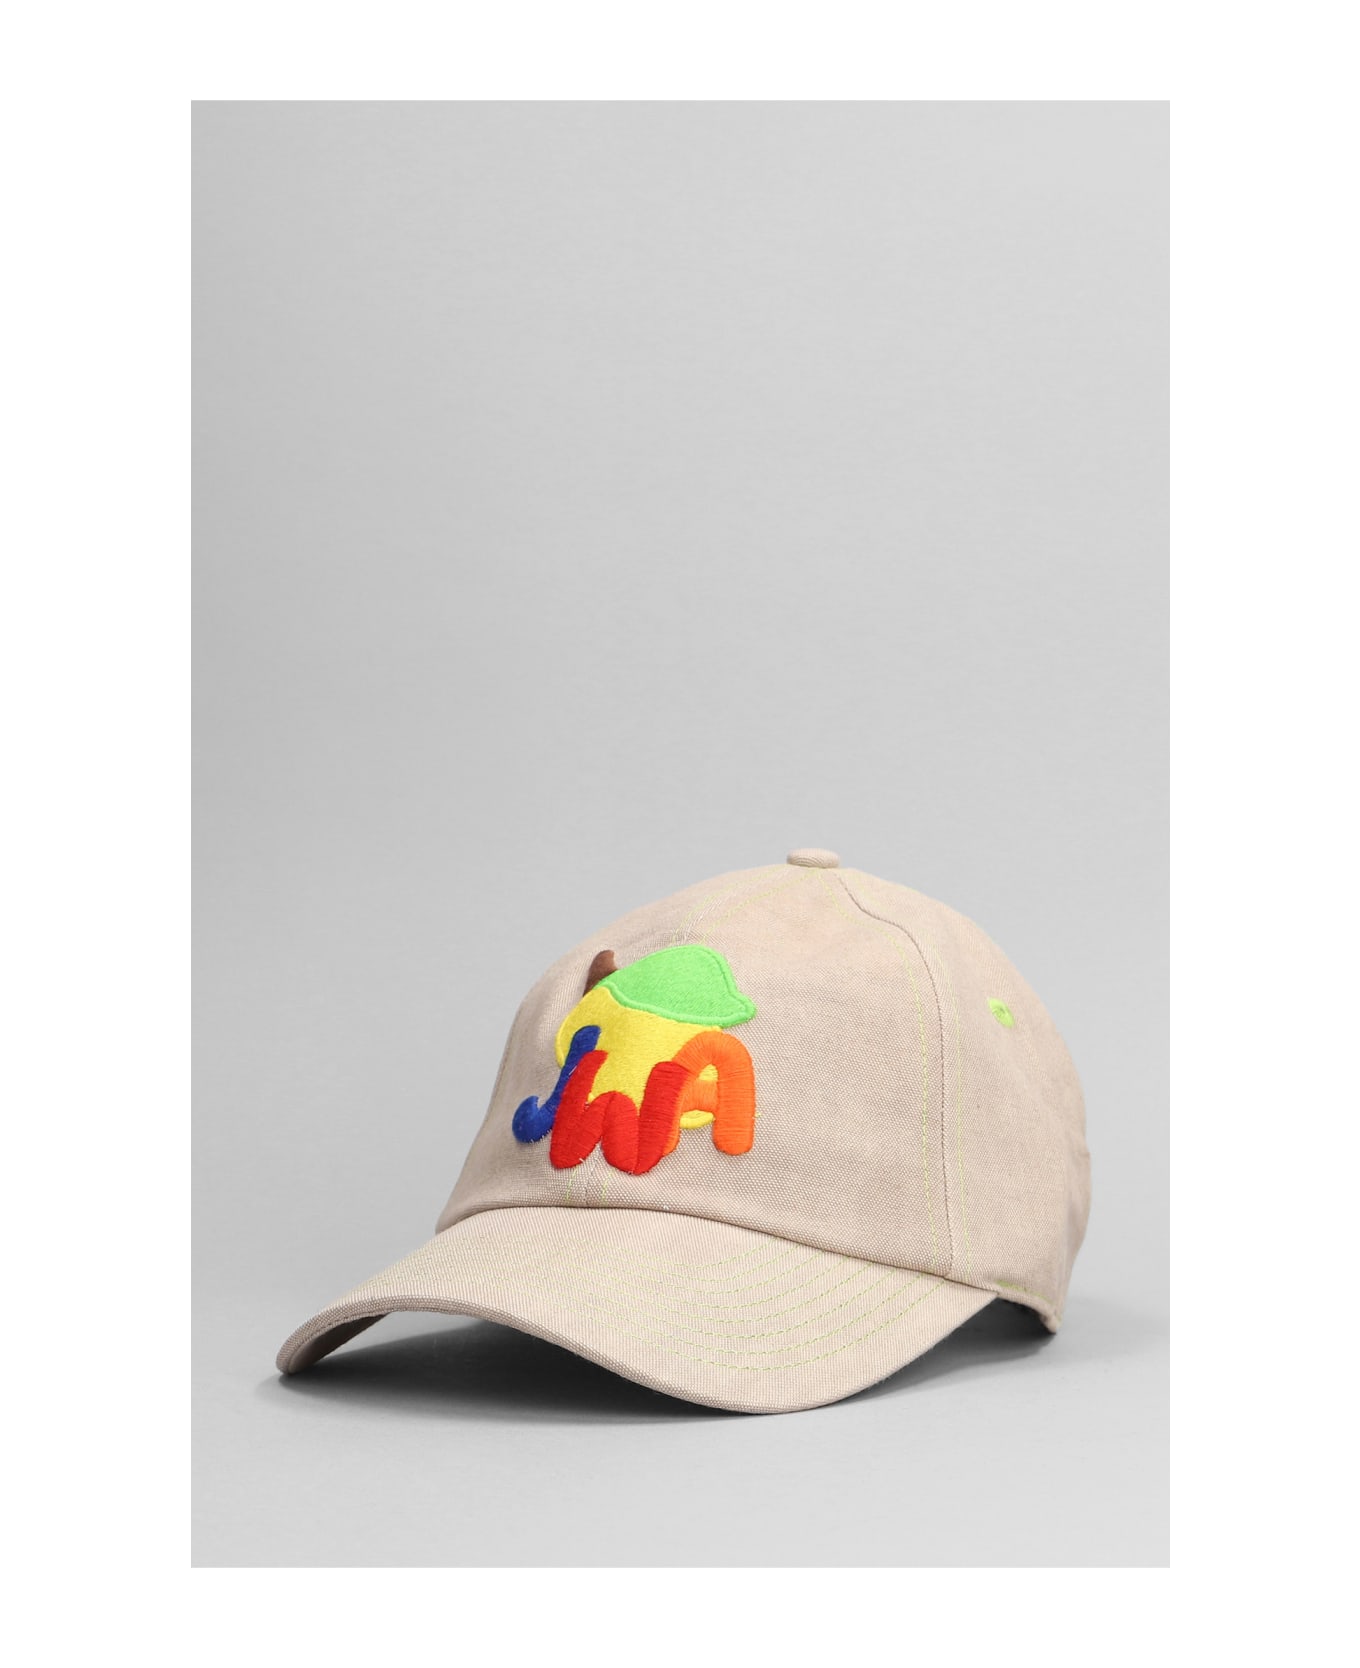 J.W. Anderson Jw Anderson Patched Baseball Cap - PUTTY 帽子